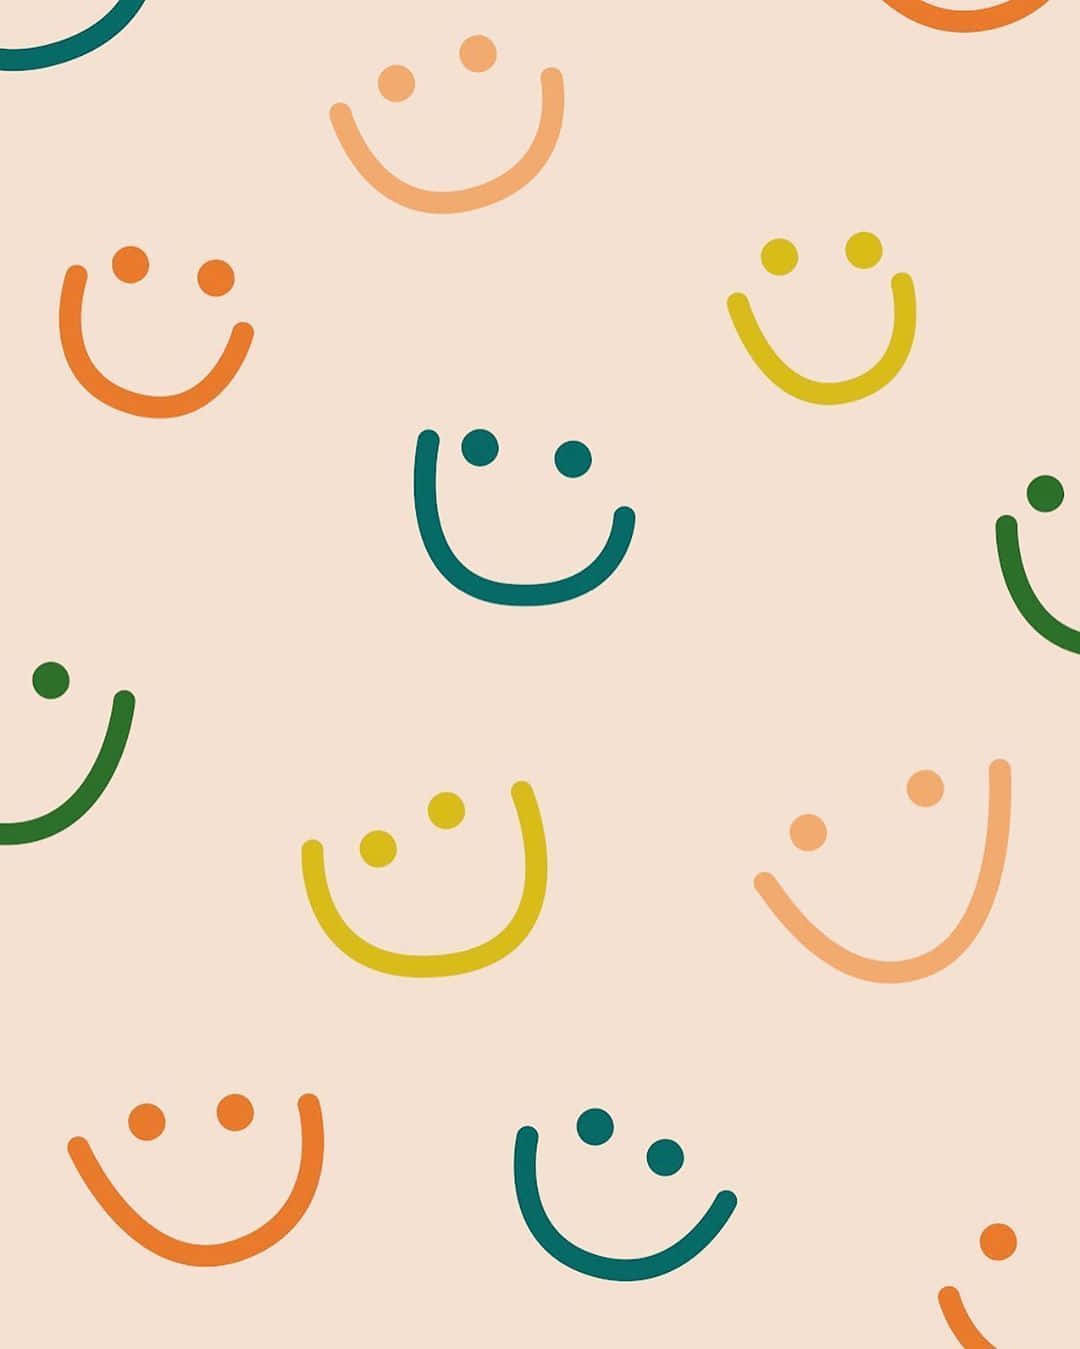 A pattern of smiley faces in different colors - Smile